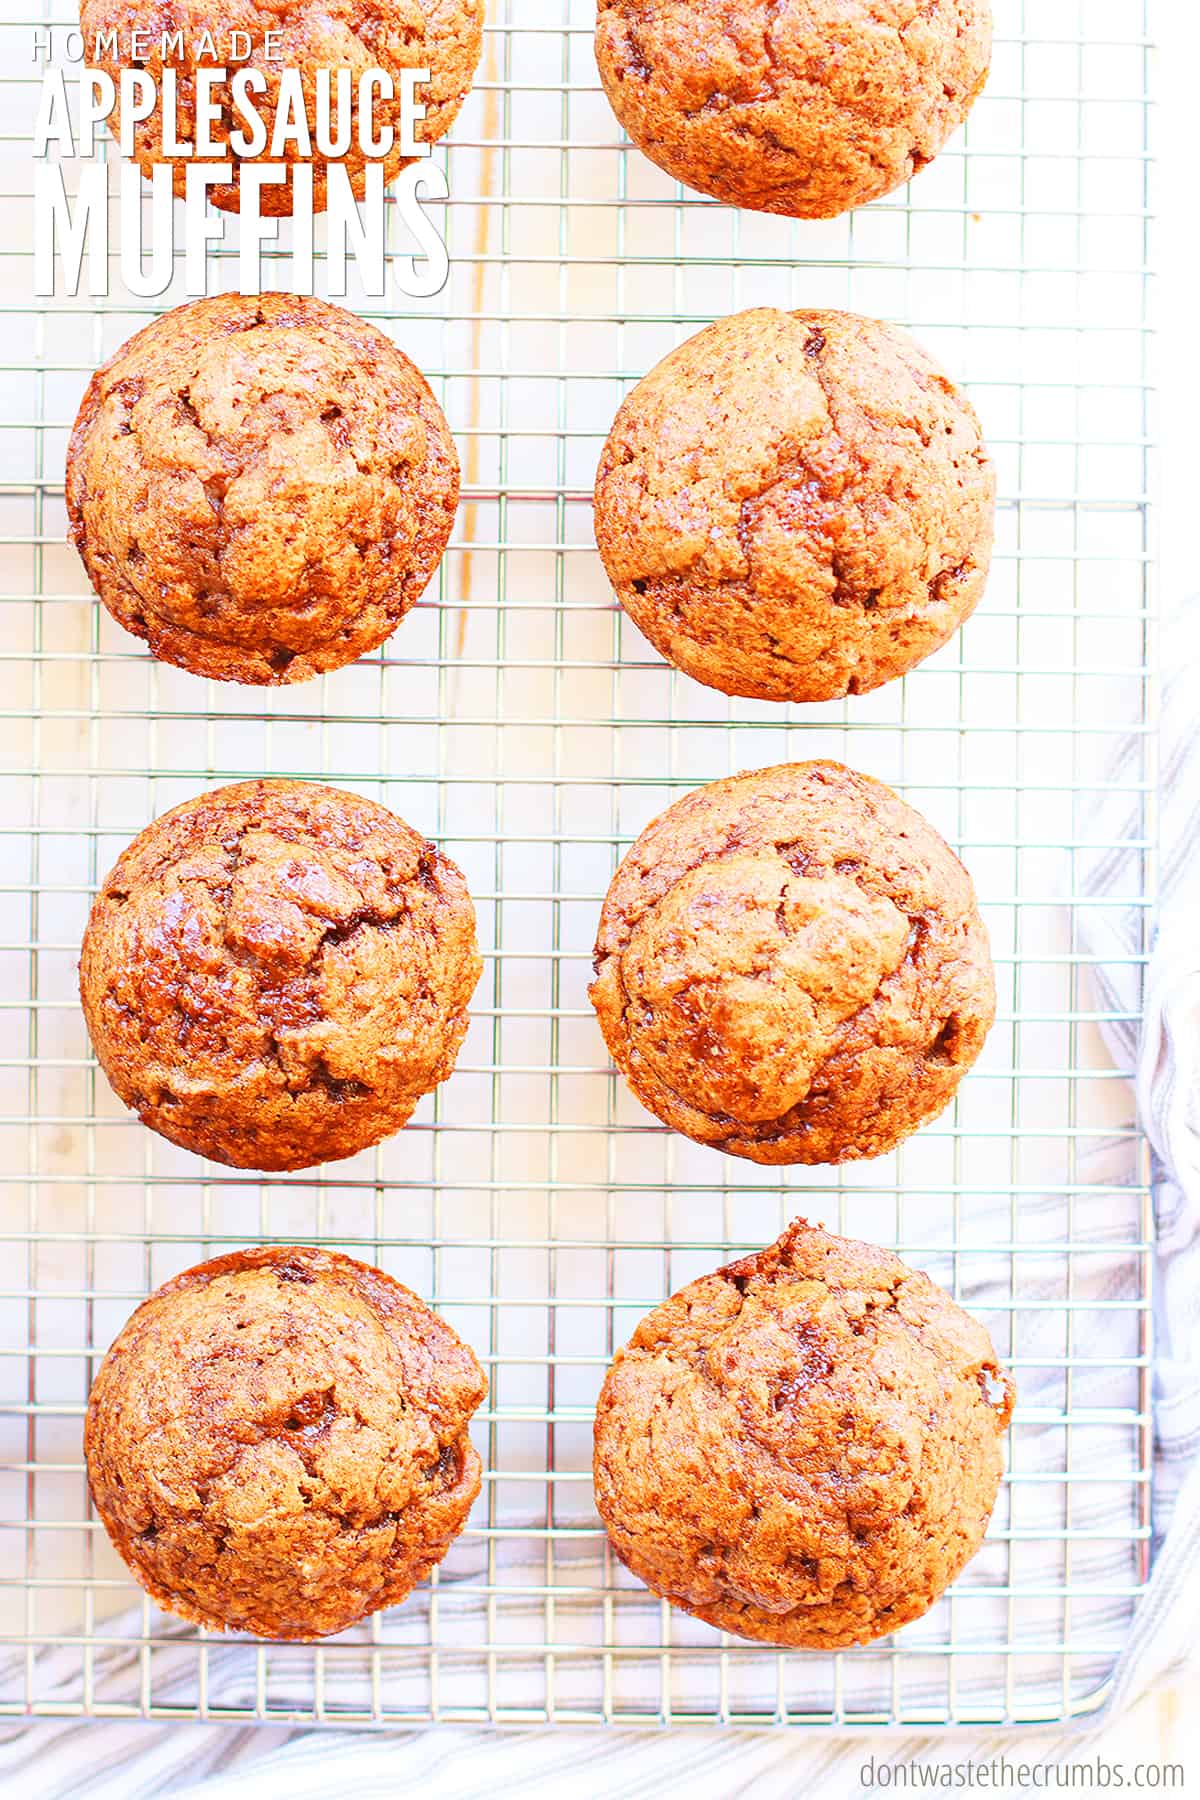 Simple applesauce muffins recipe using easy to find ingredients. Text overlay reads Homemade Applesauce Muffins.